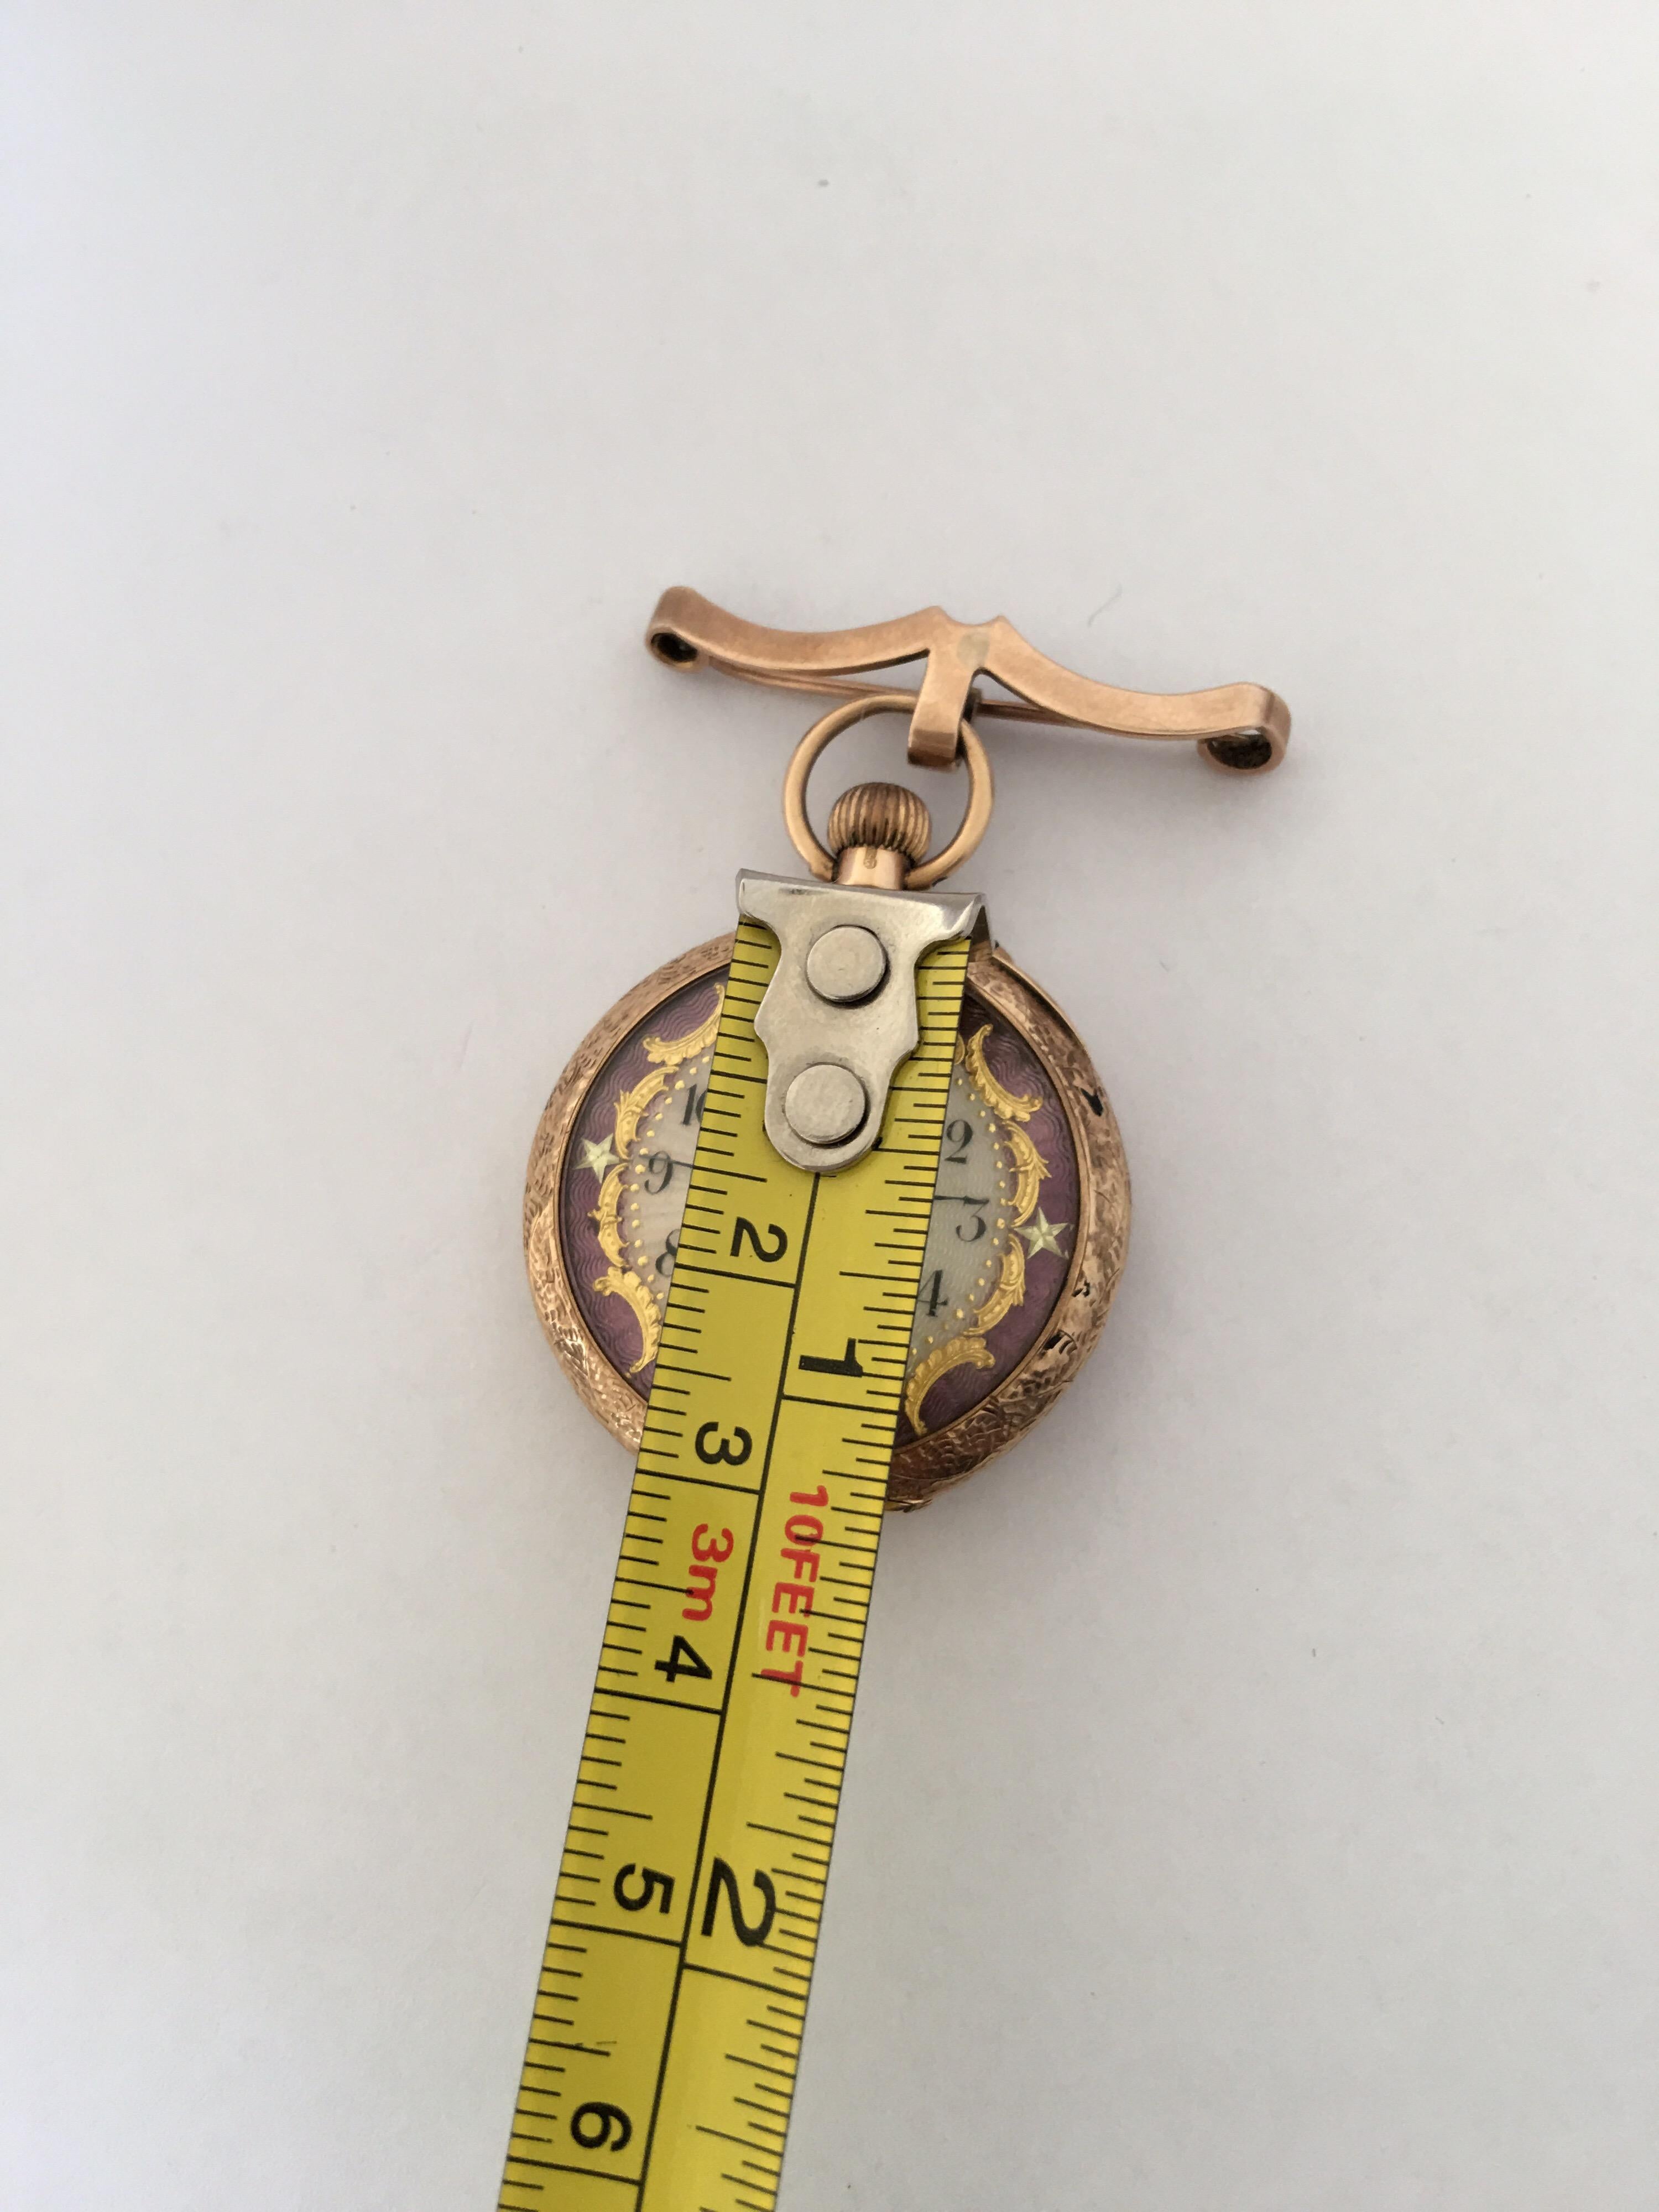 15 Karat Gold Enamel Gold Inlaid Dial Antique Brooch Fob Watch, circa 1890 In Good Condition For Sale In Carlisle, GB